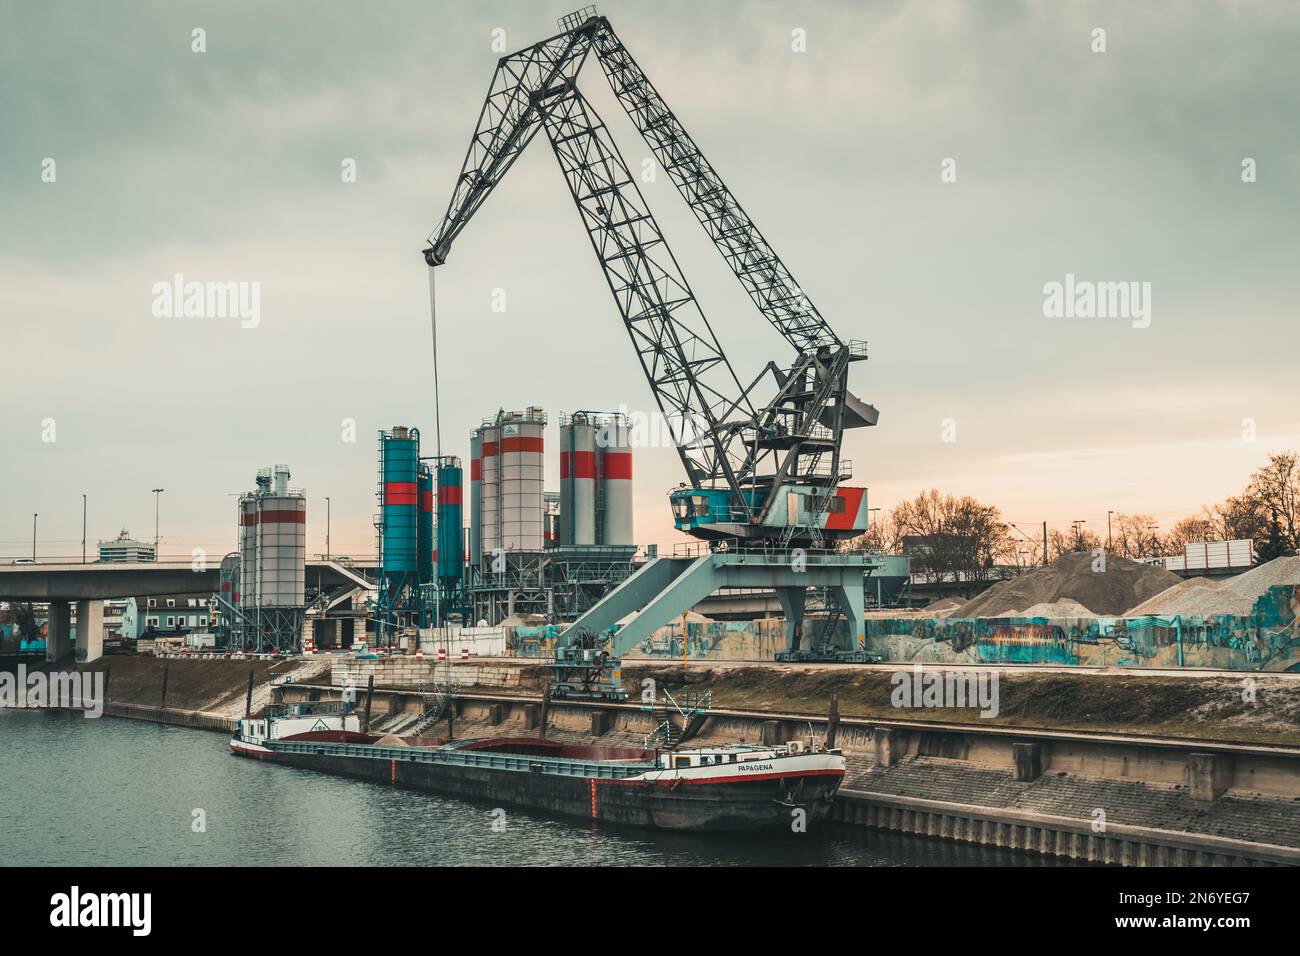 Mannheim, Germany - 26.03.2021: Gravel works with excavators in the port area of Mannheim Stock Photo